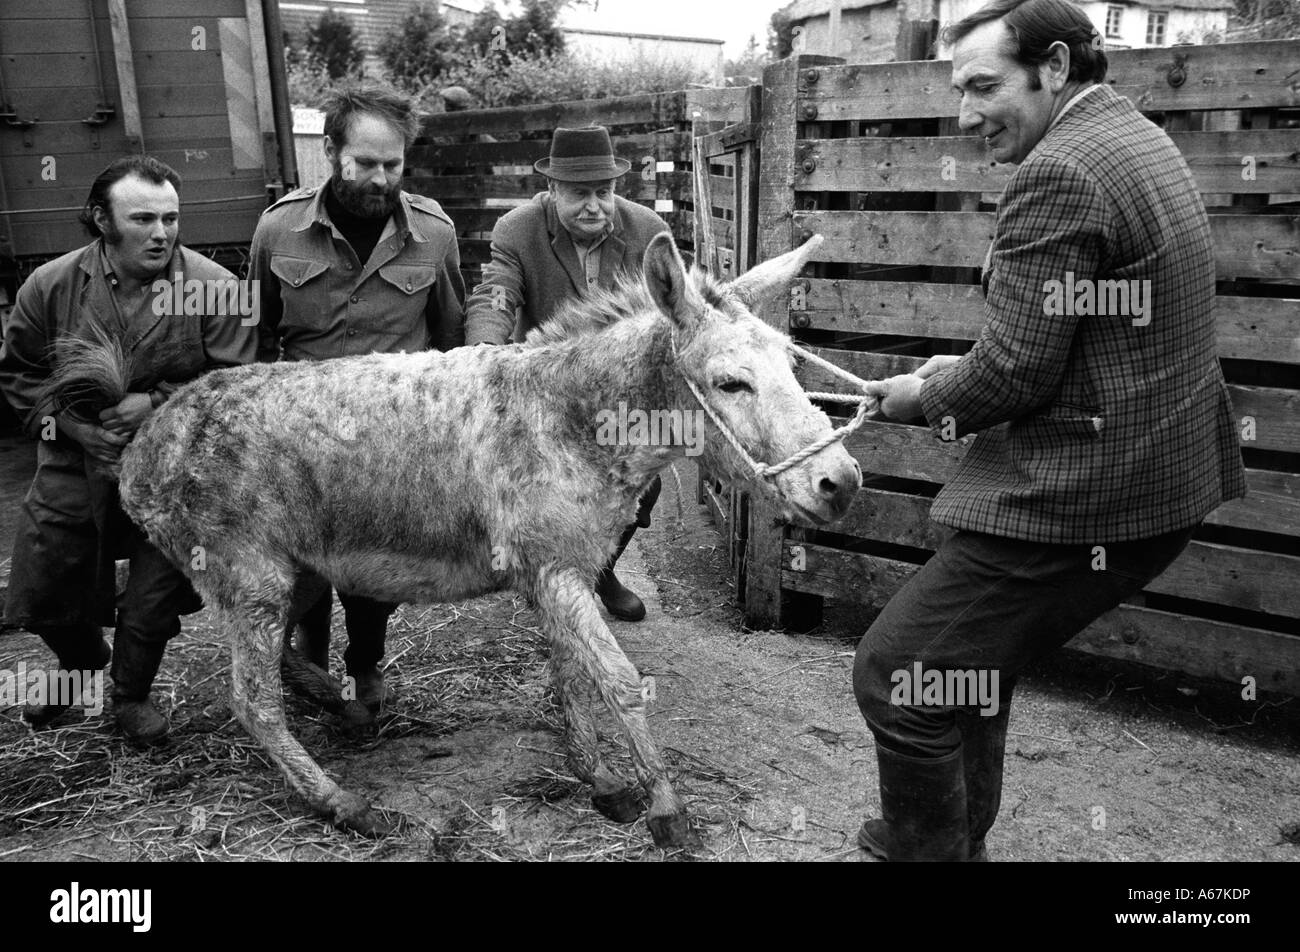 Sale of Horses Auction UK 1970s. A mule is being stubborn and will not go into the auction ring. Hatherleigh, Devon November 1973.  HOMER SYKES Stock Photo